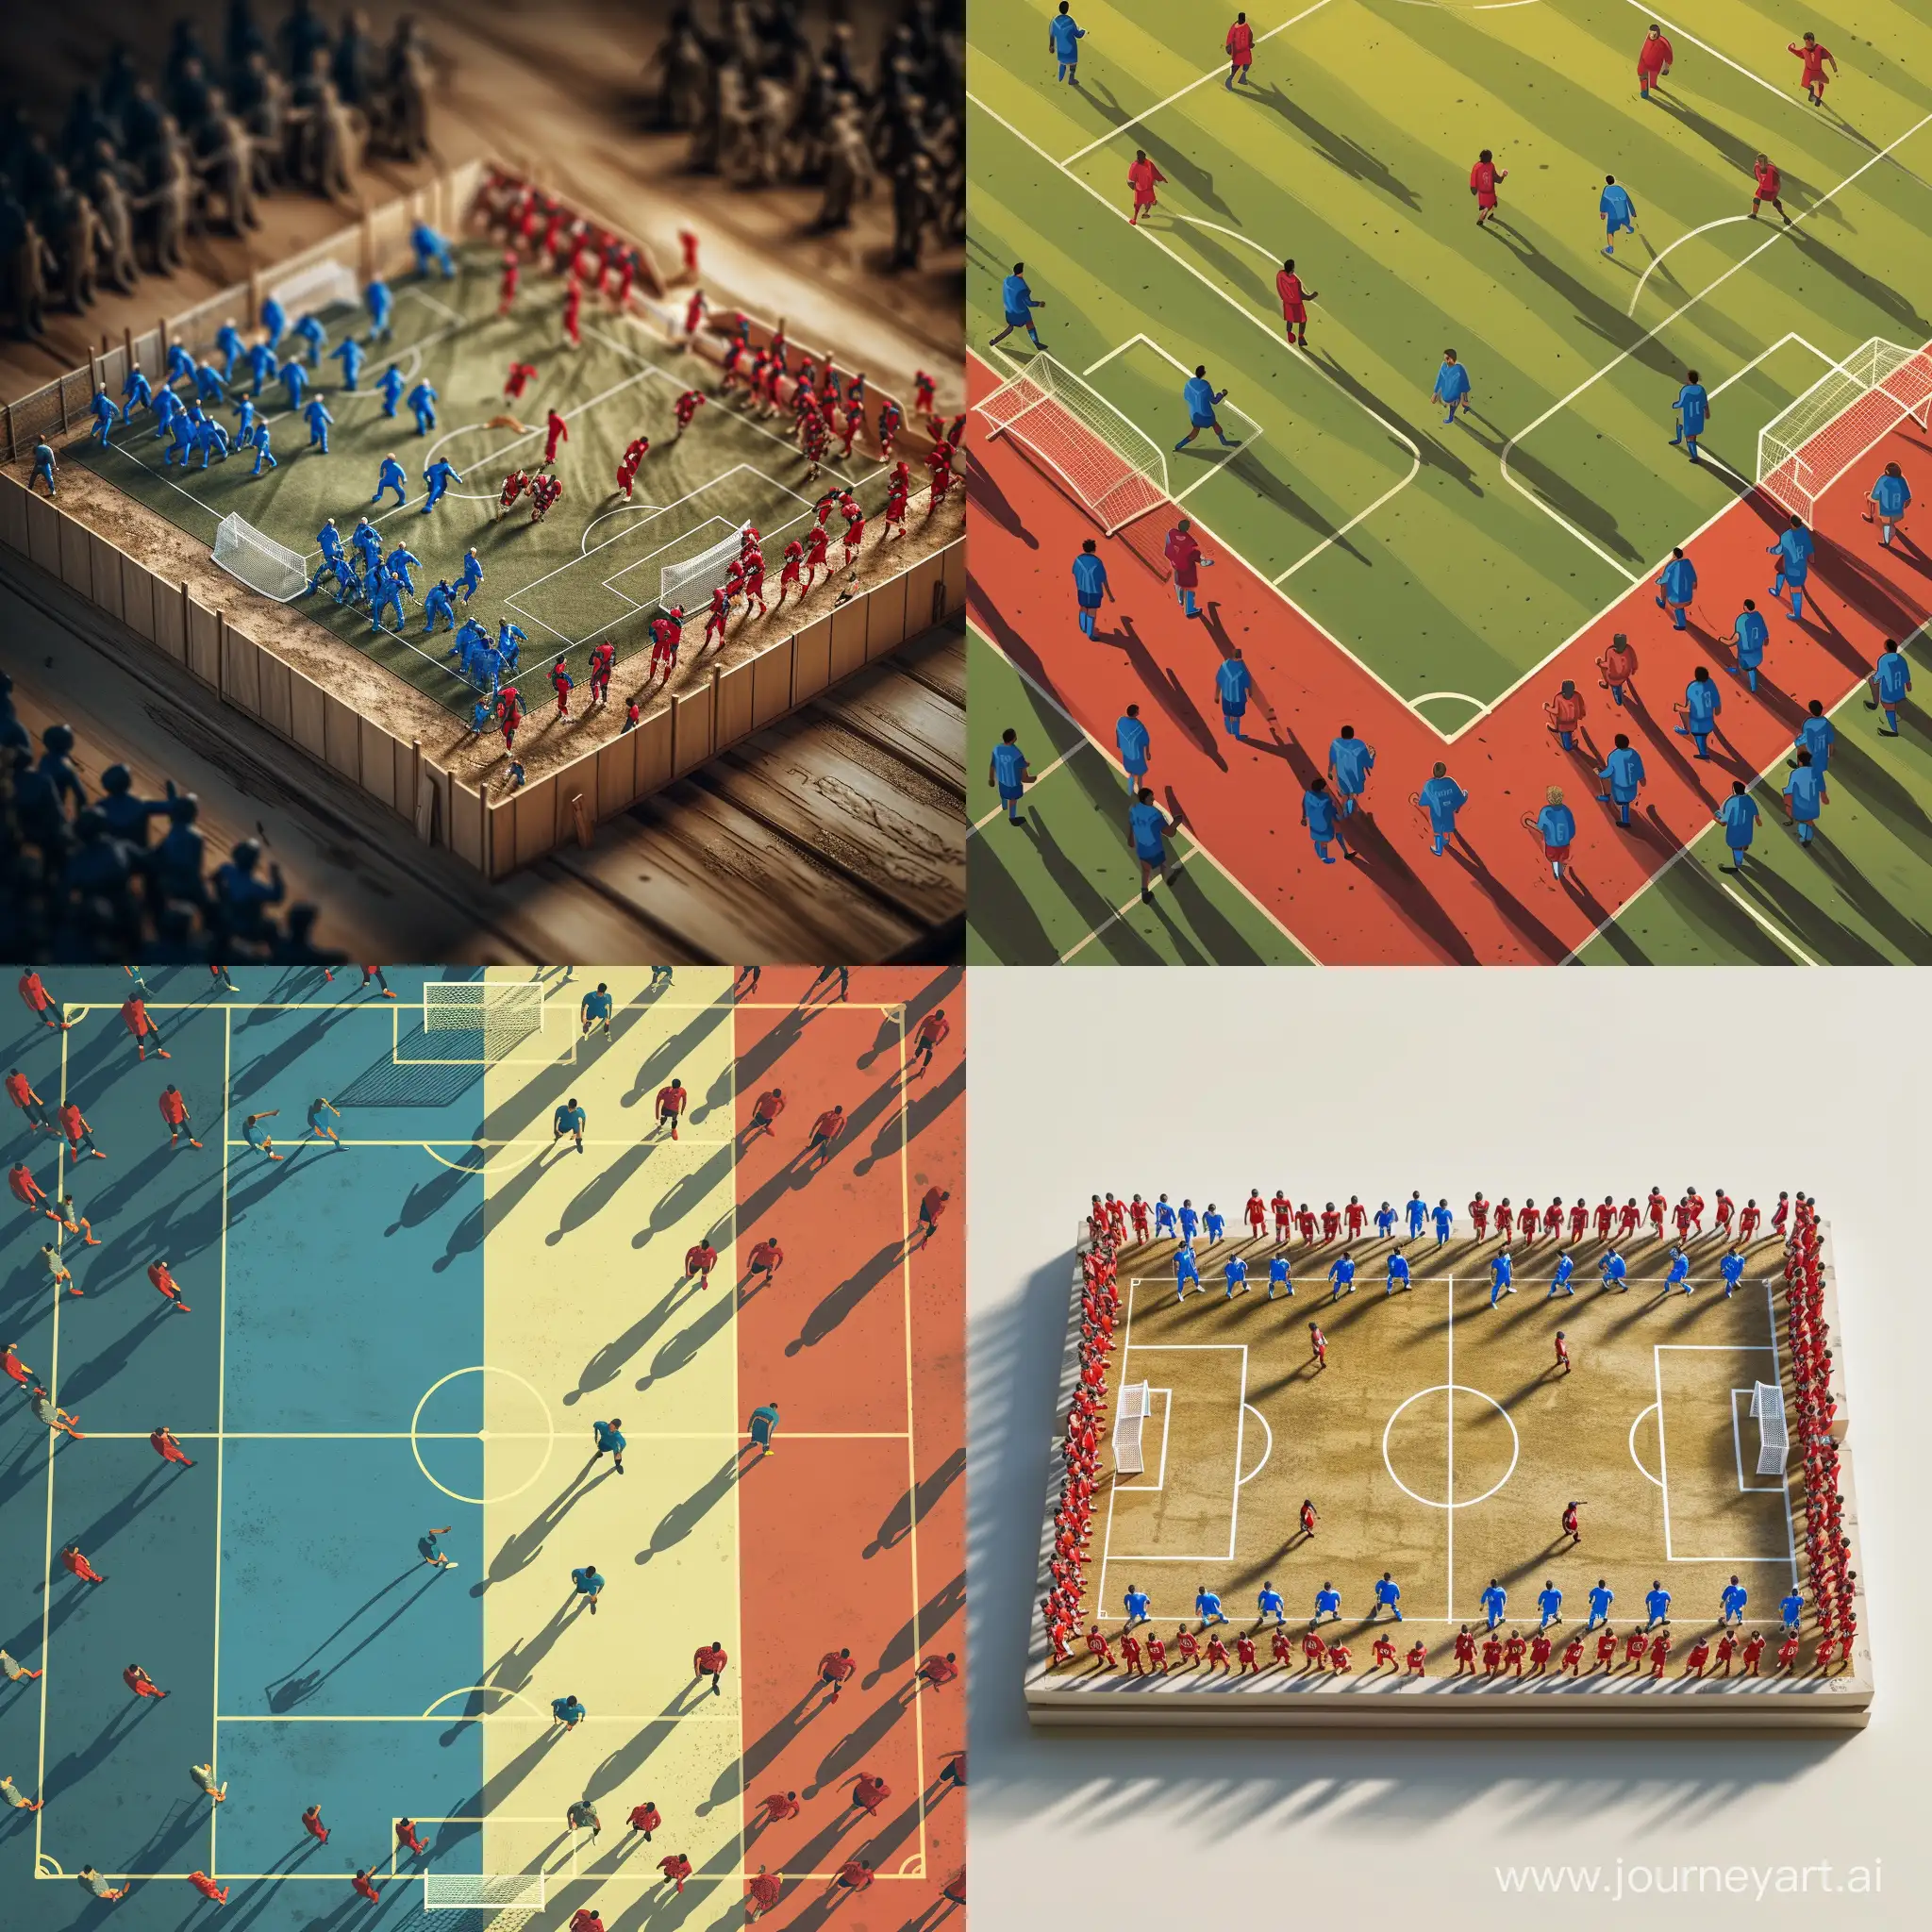 Vibrant-Soccer-Match-Blue-vs-Red-Teams-on-Detailed-Cutaway-Field